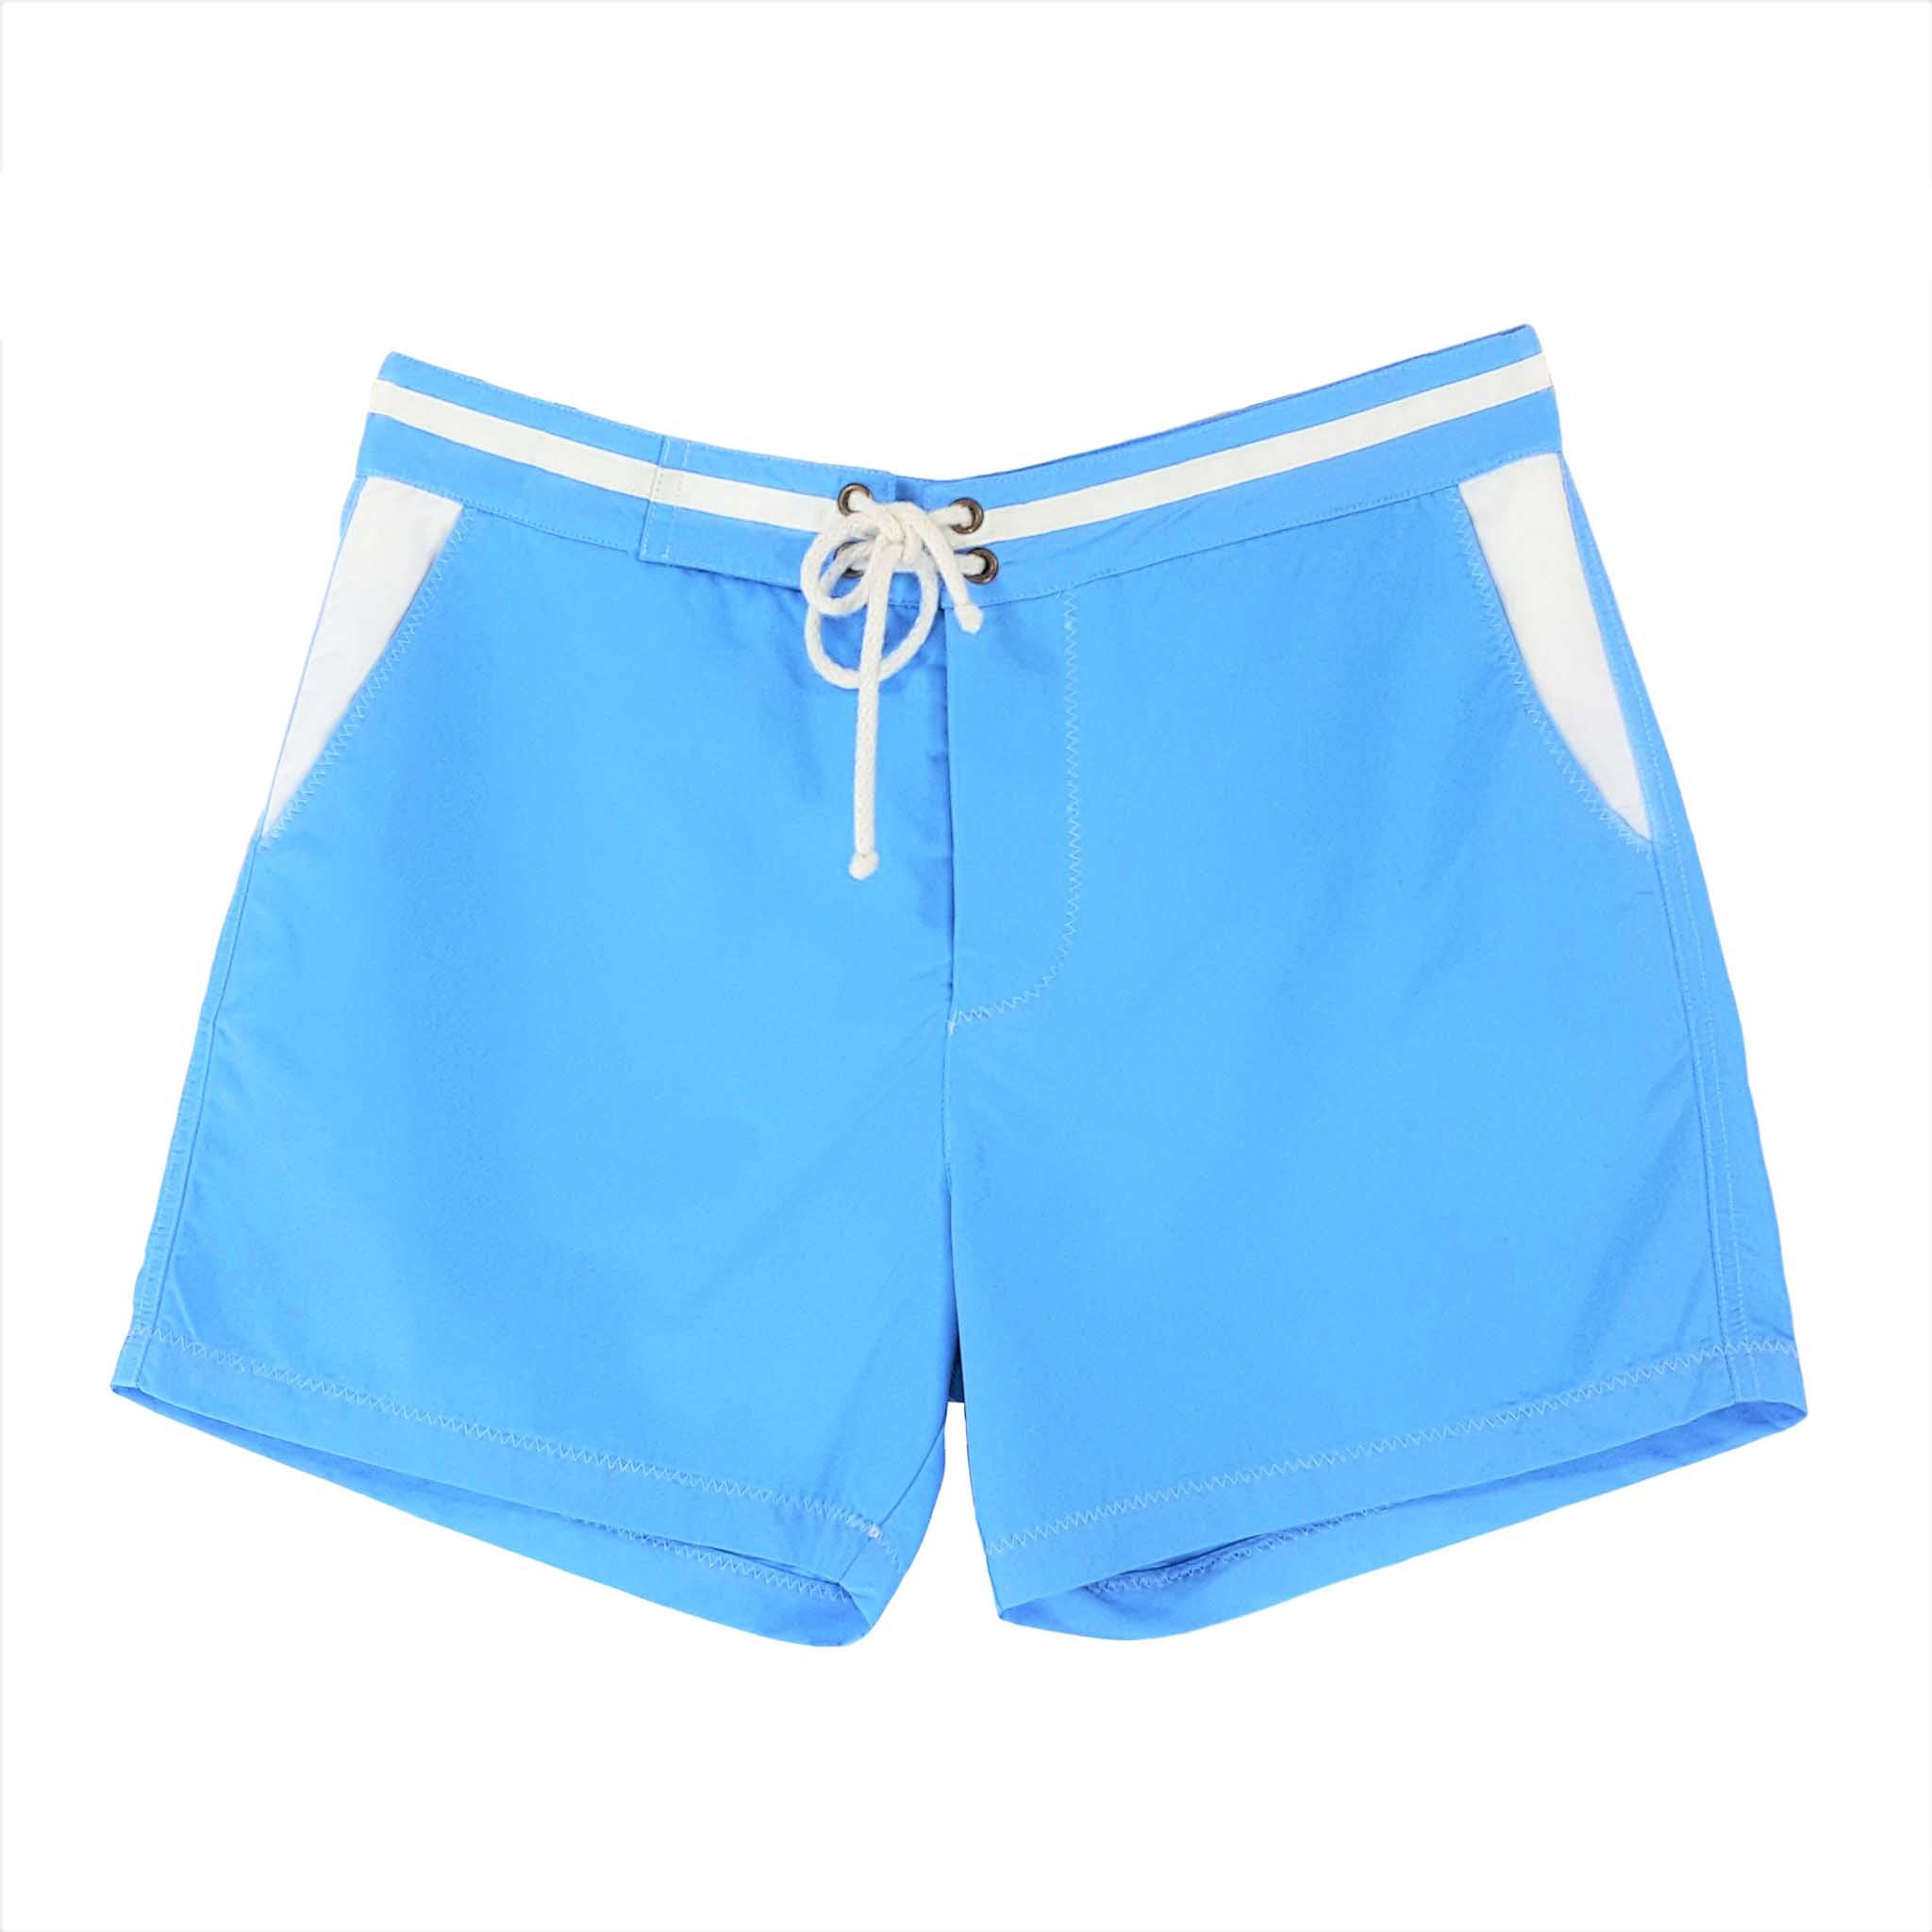 Light blue swimming trunks made from recycled polyester from Bluebuck